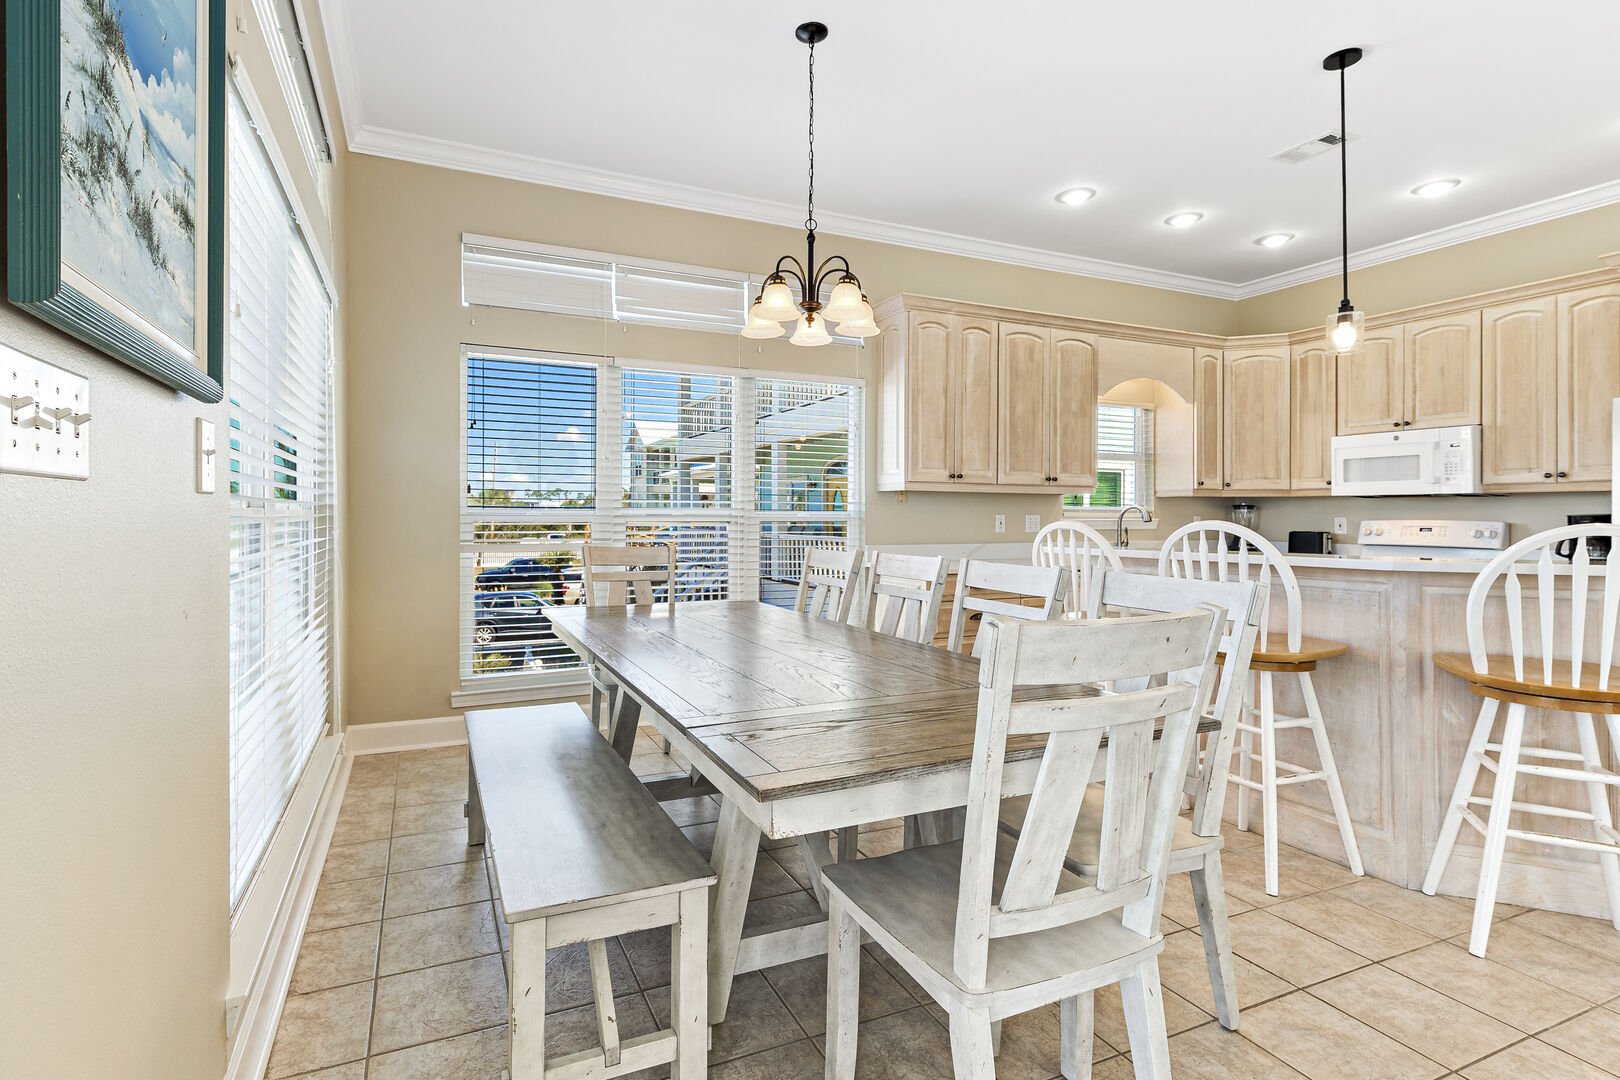 Open Plan Living Area with Dining Table that seats 6 and Extra Seating at the Breakfast Bar